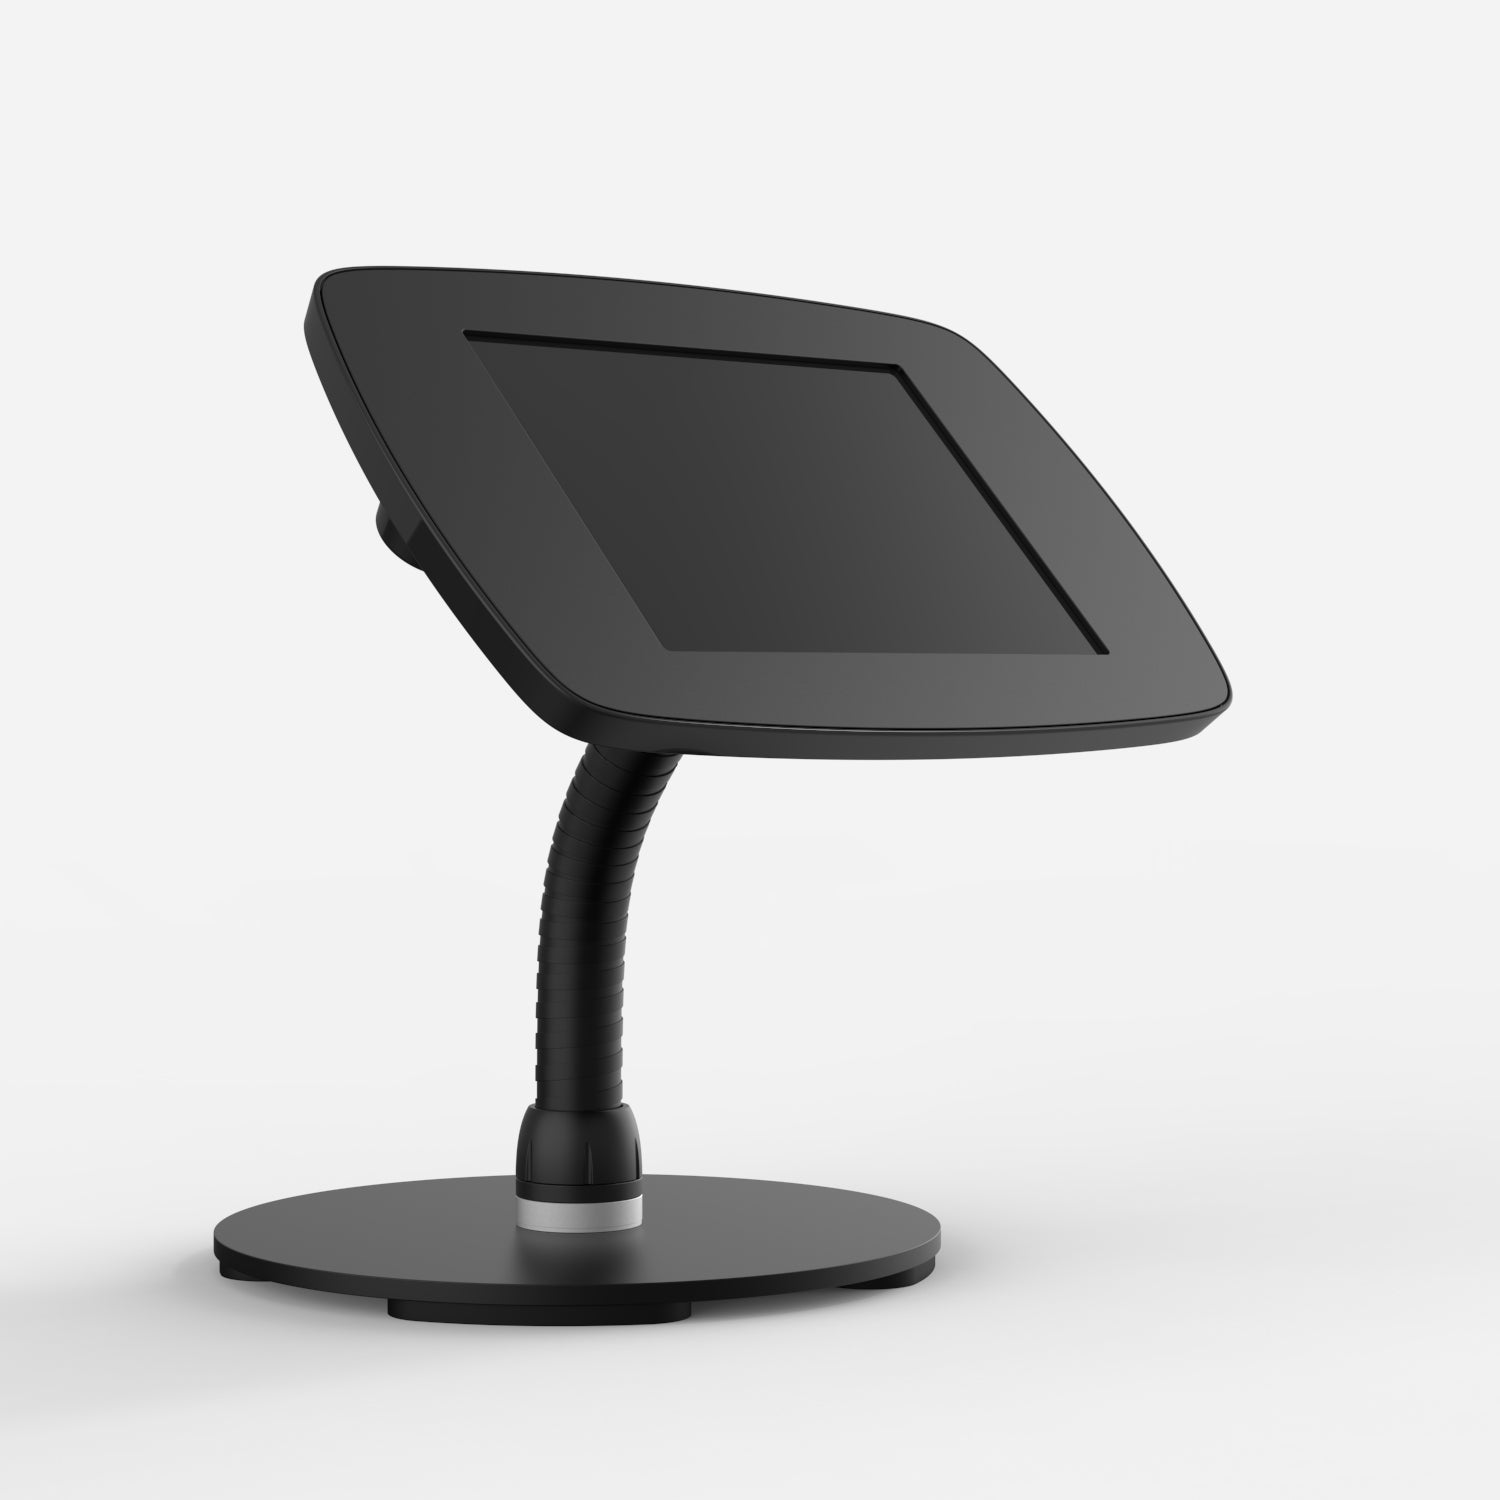 Bouncepad Counter Flex - A secure tablet & iPad gooseneck stand in black.